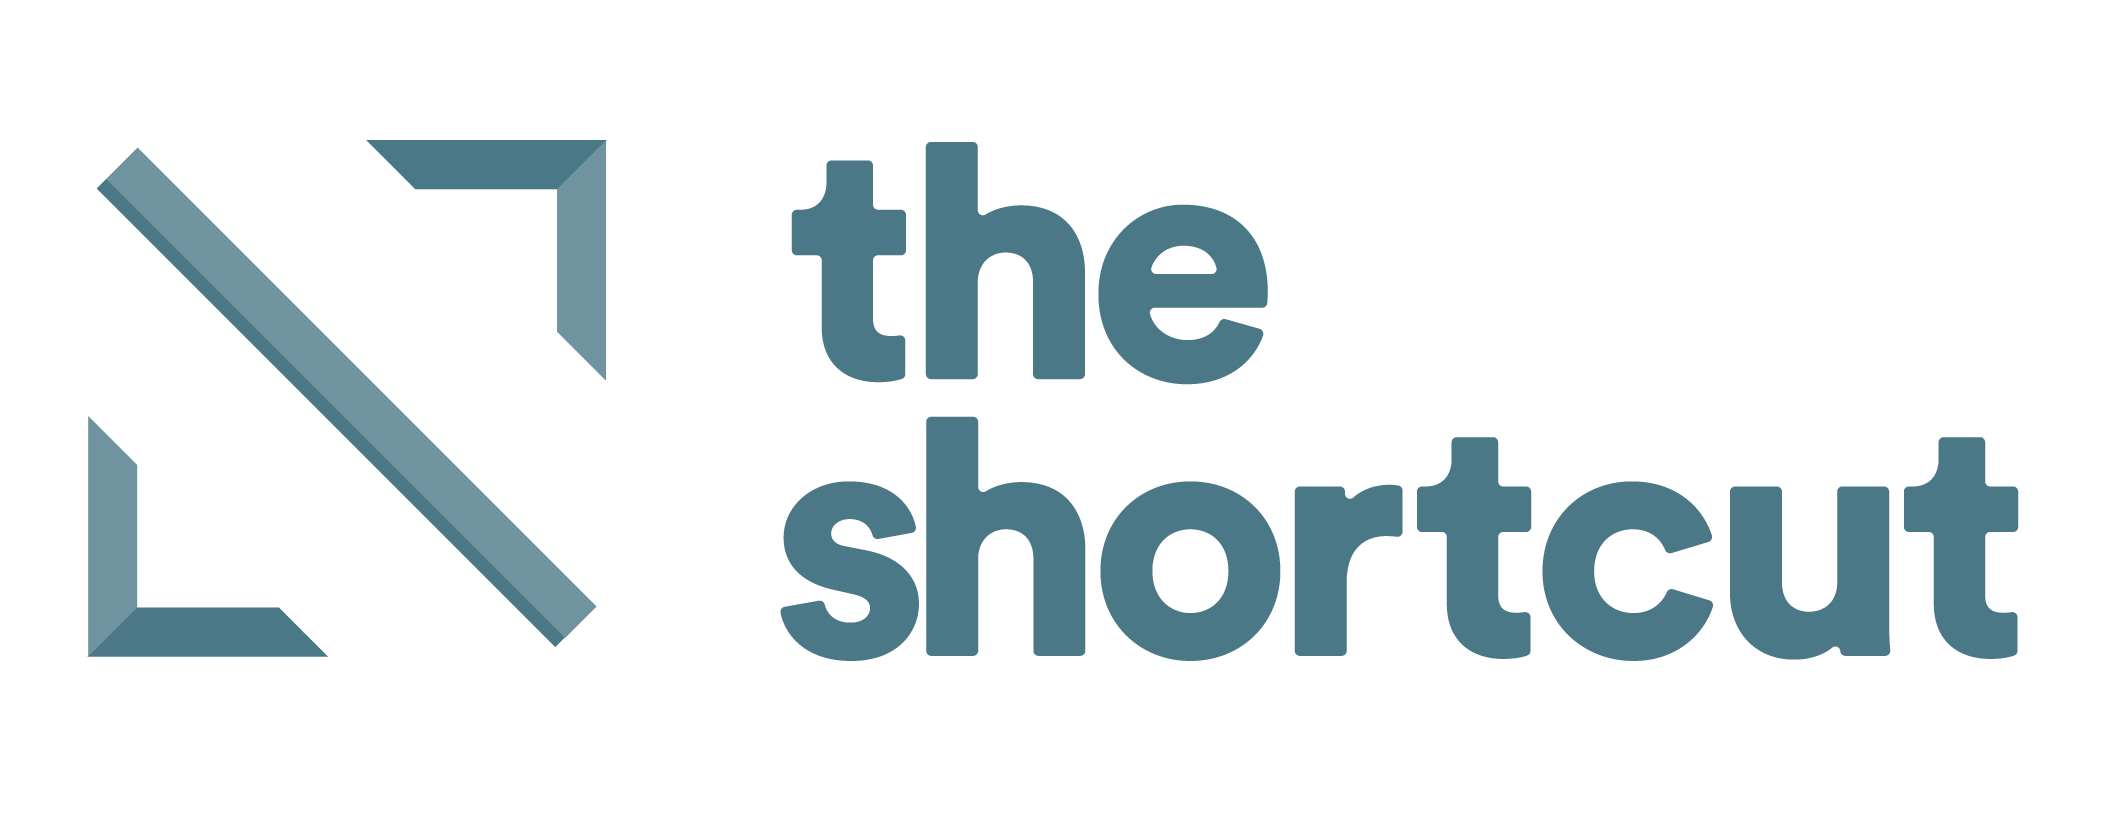 the-shortcut_logo_brittany.png